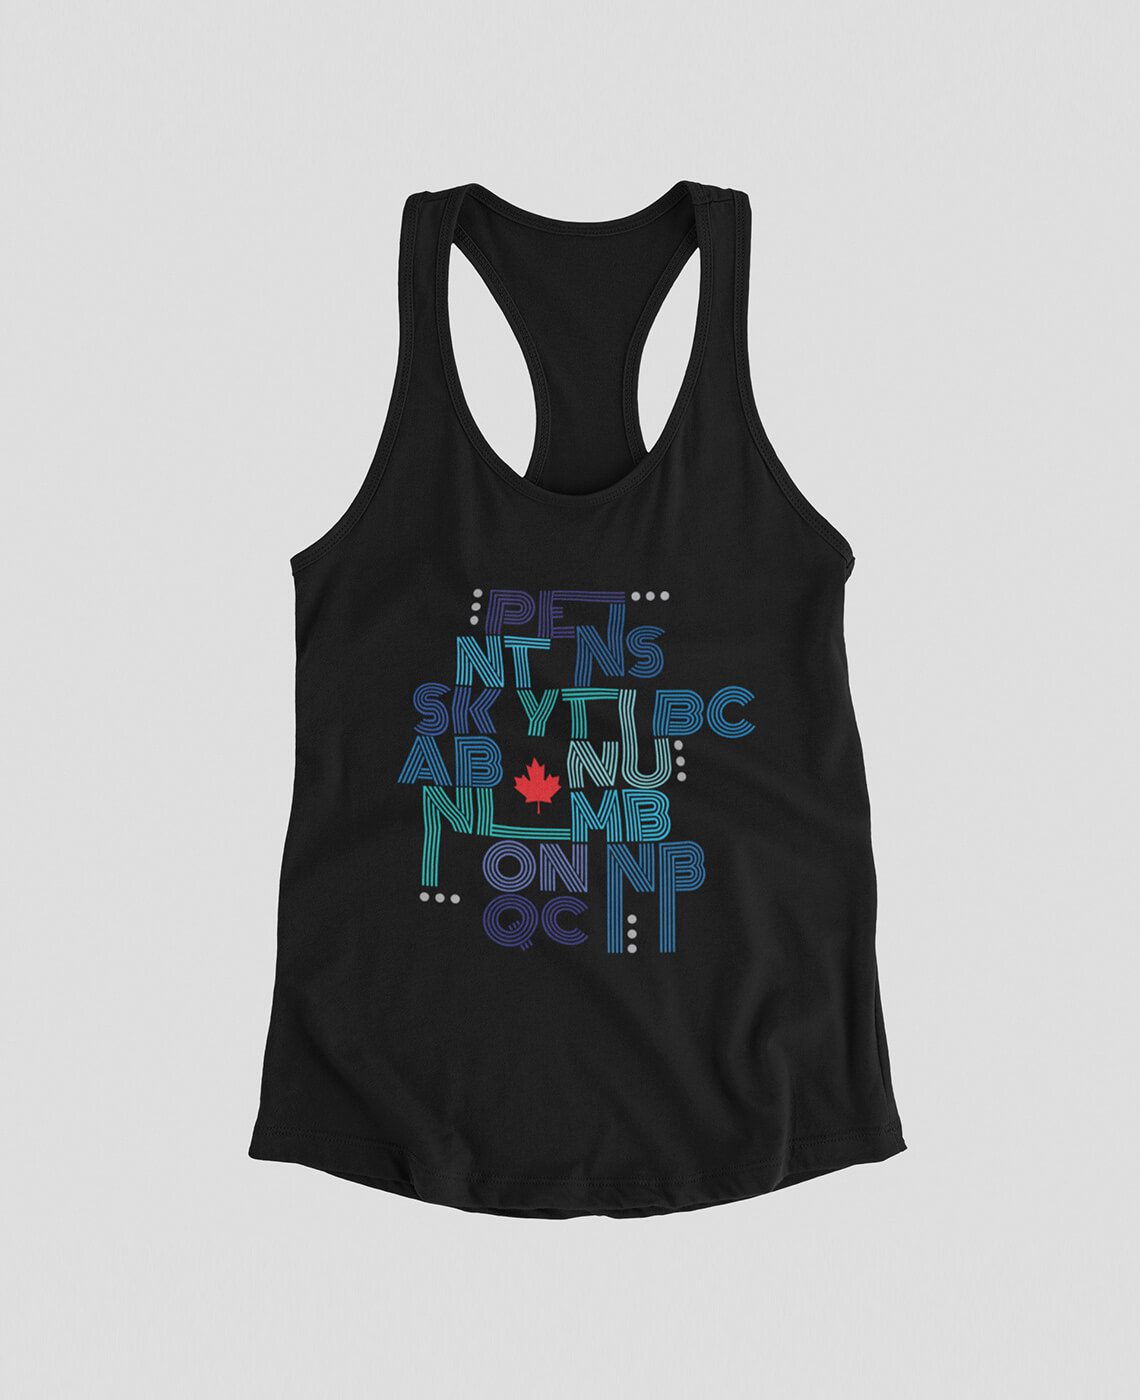 provinces one7 womens tank top 2